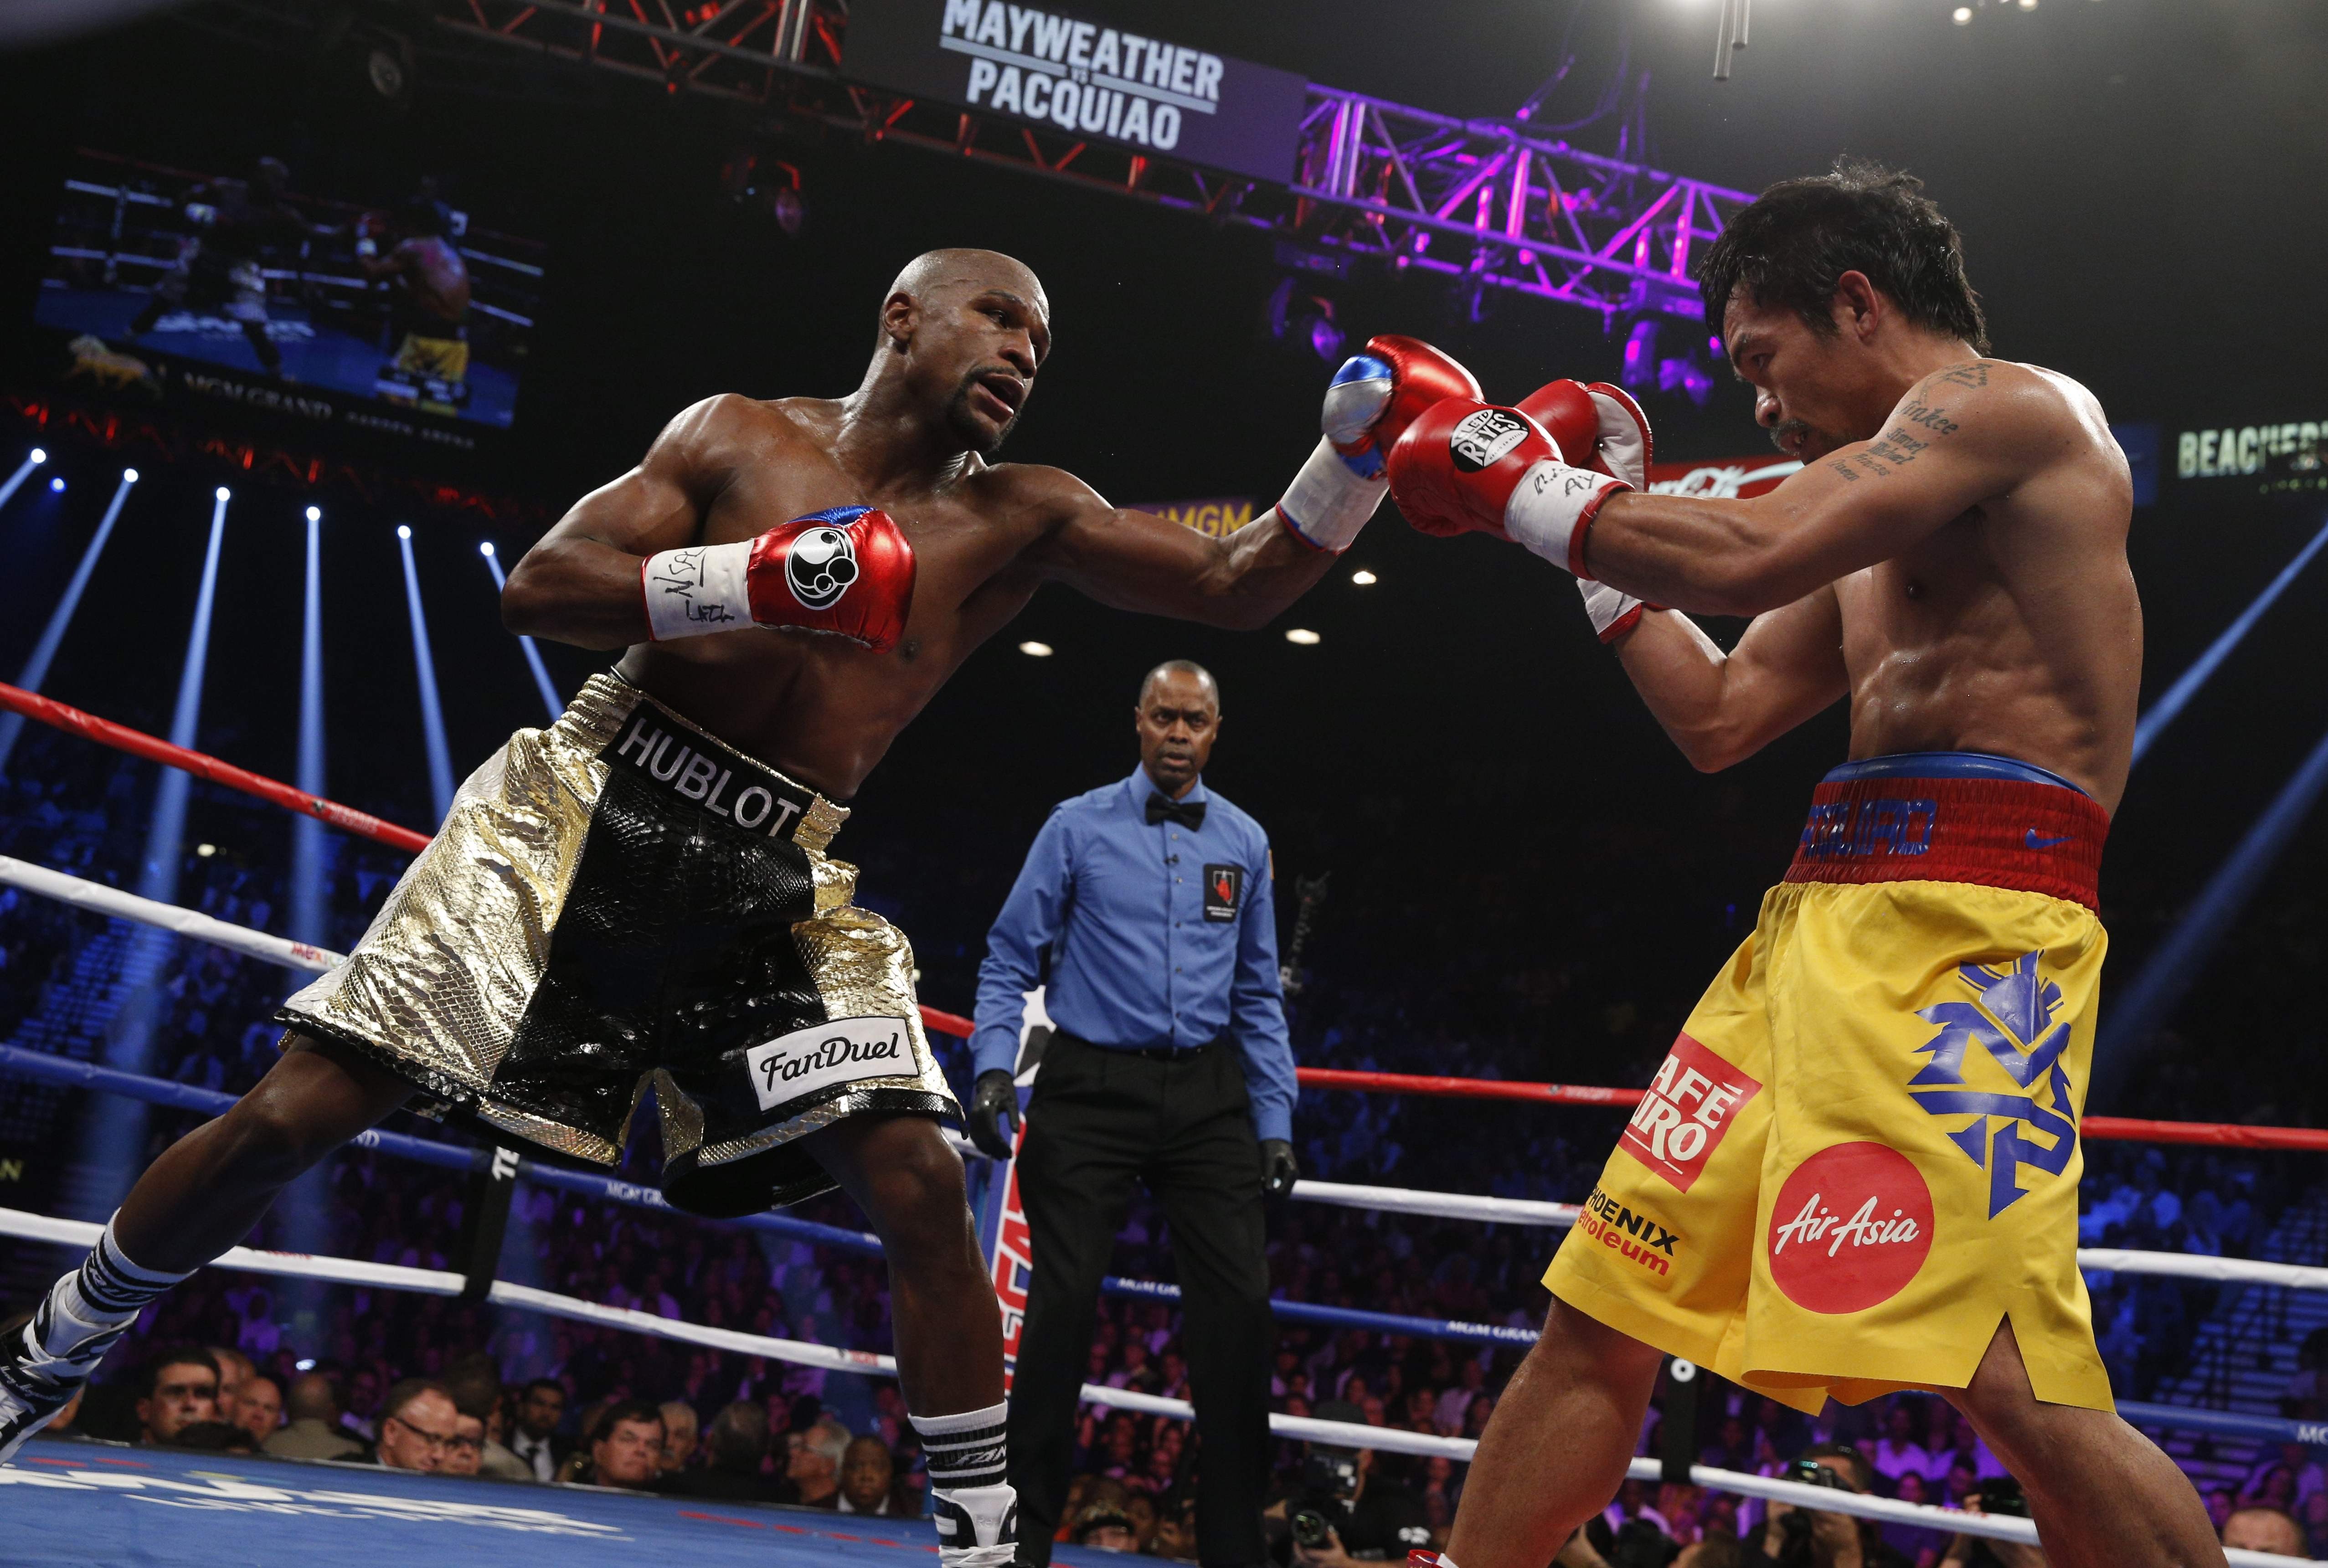 Floyd Mayweather Jr (left) exchanges punches with Manny Pacquiao during their welterweight unification championship bout, May 2, 2015 at MGM Grand Garden Arena in Las Vegas, Nevada, the US. Photo: AFP